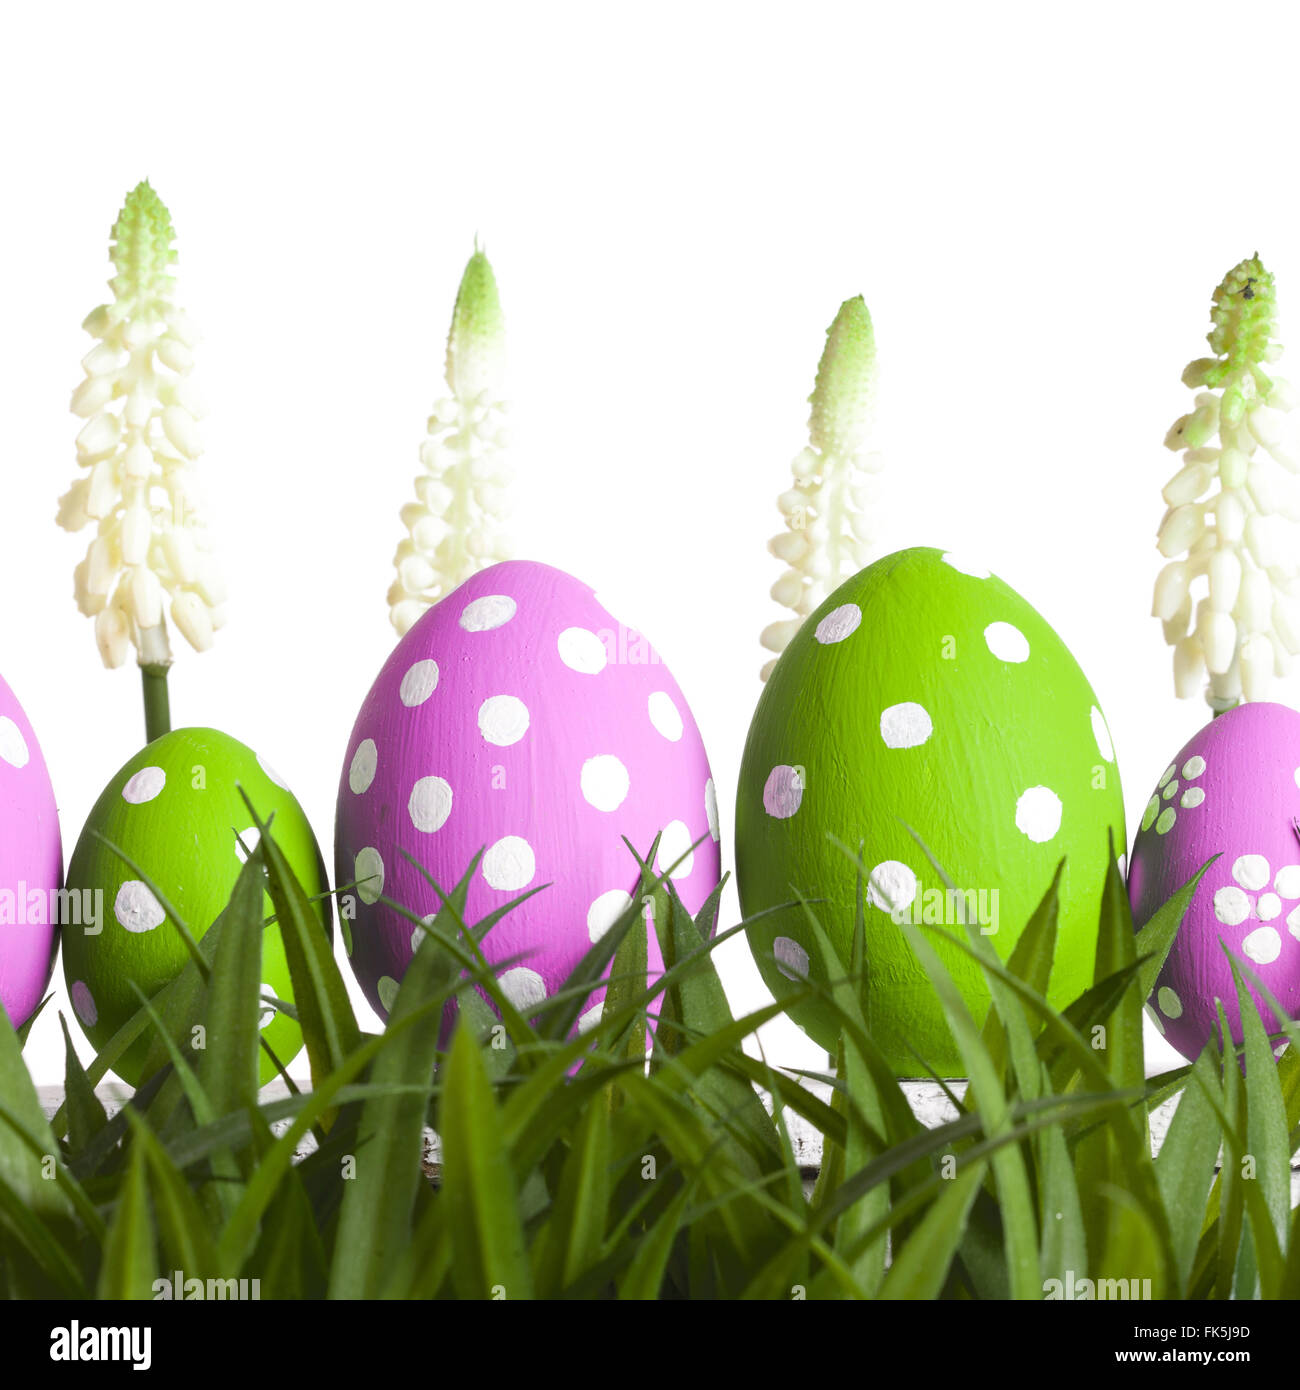 Row of Easter eggs on grass Stock Photo